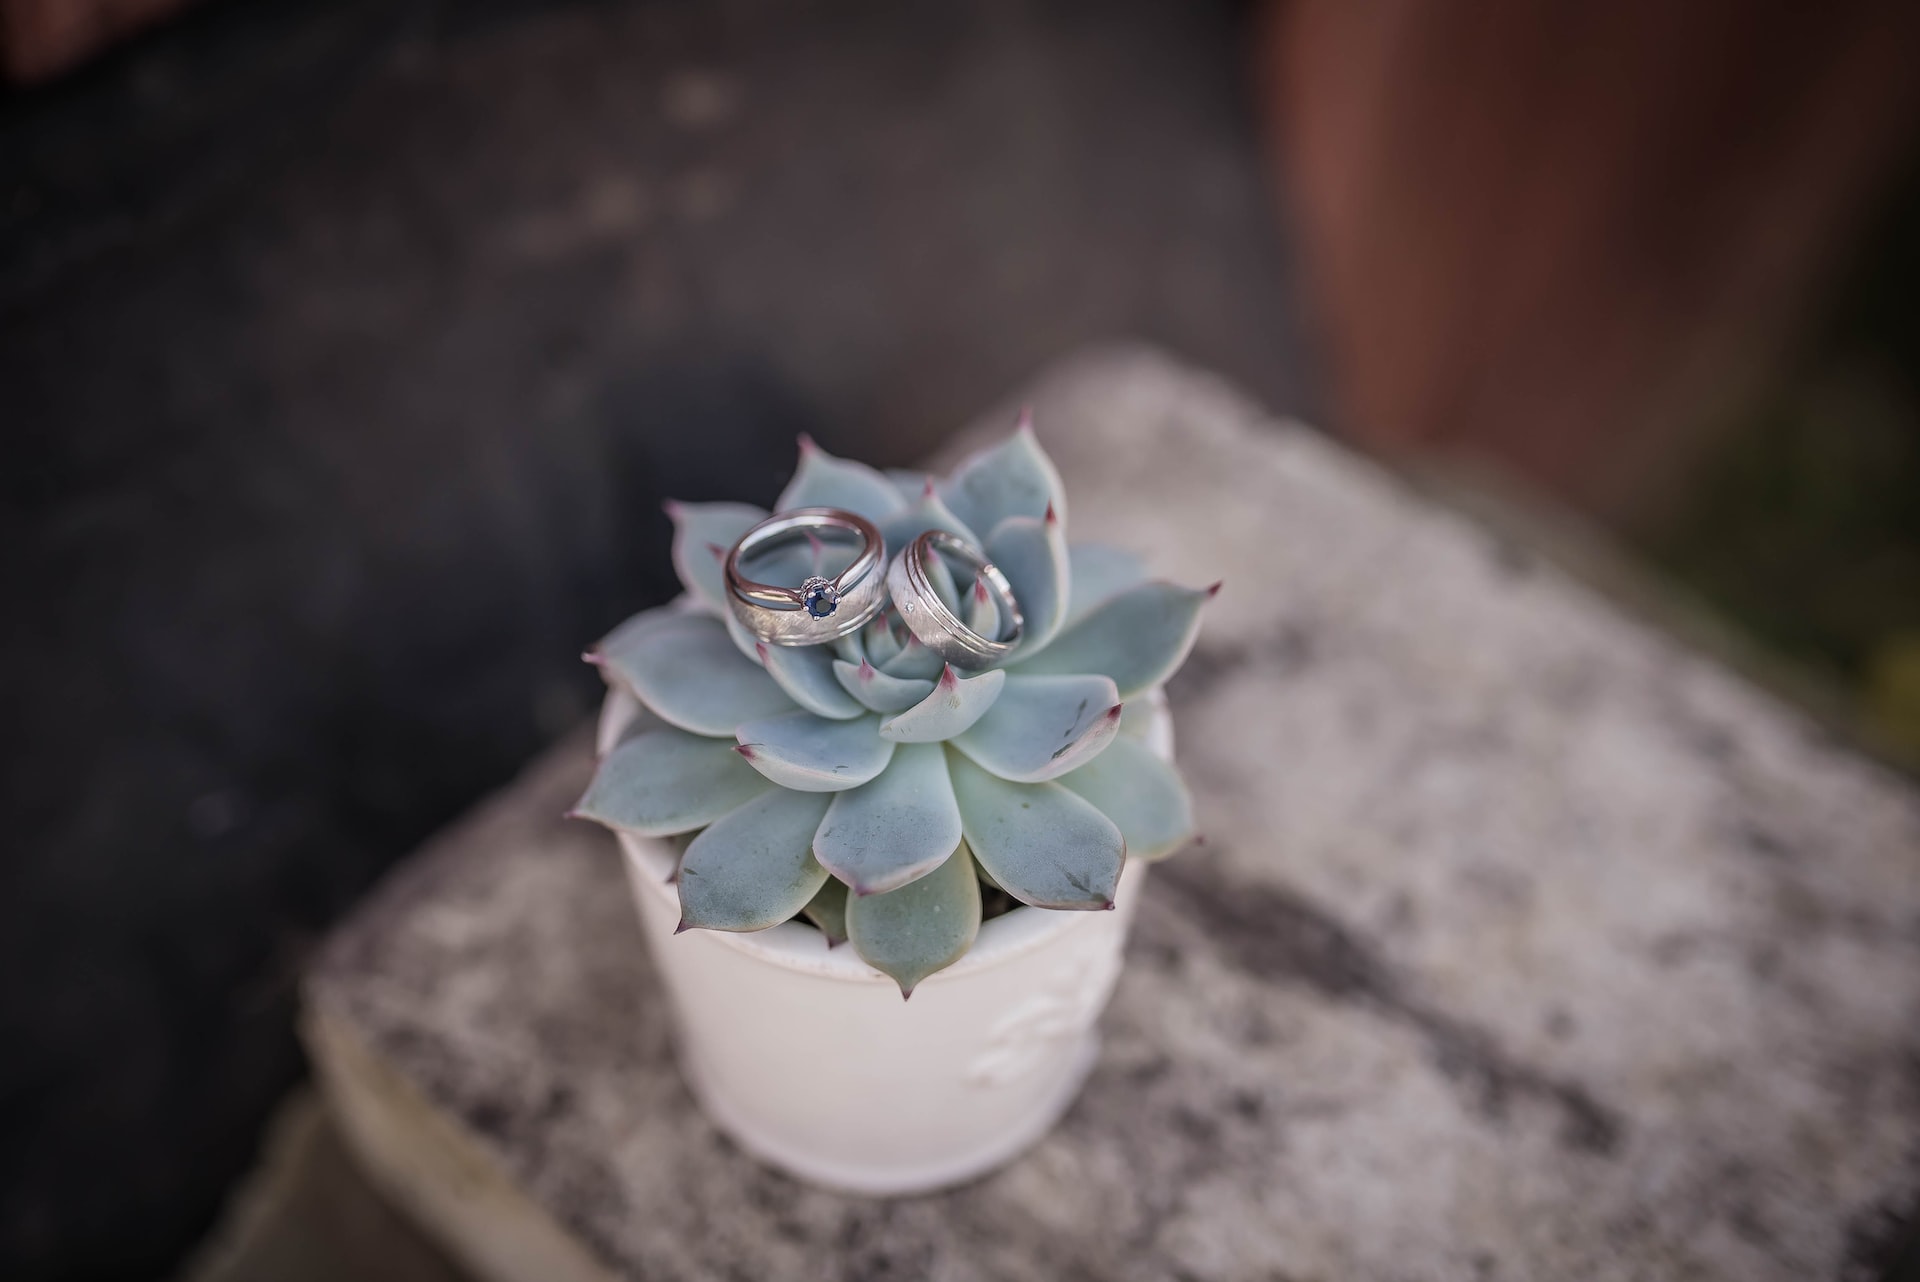 A succulent with wedding rings for those who plan an eco-friendly wedding